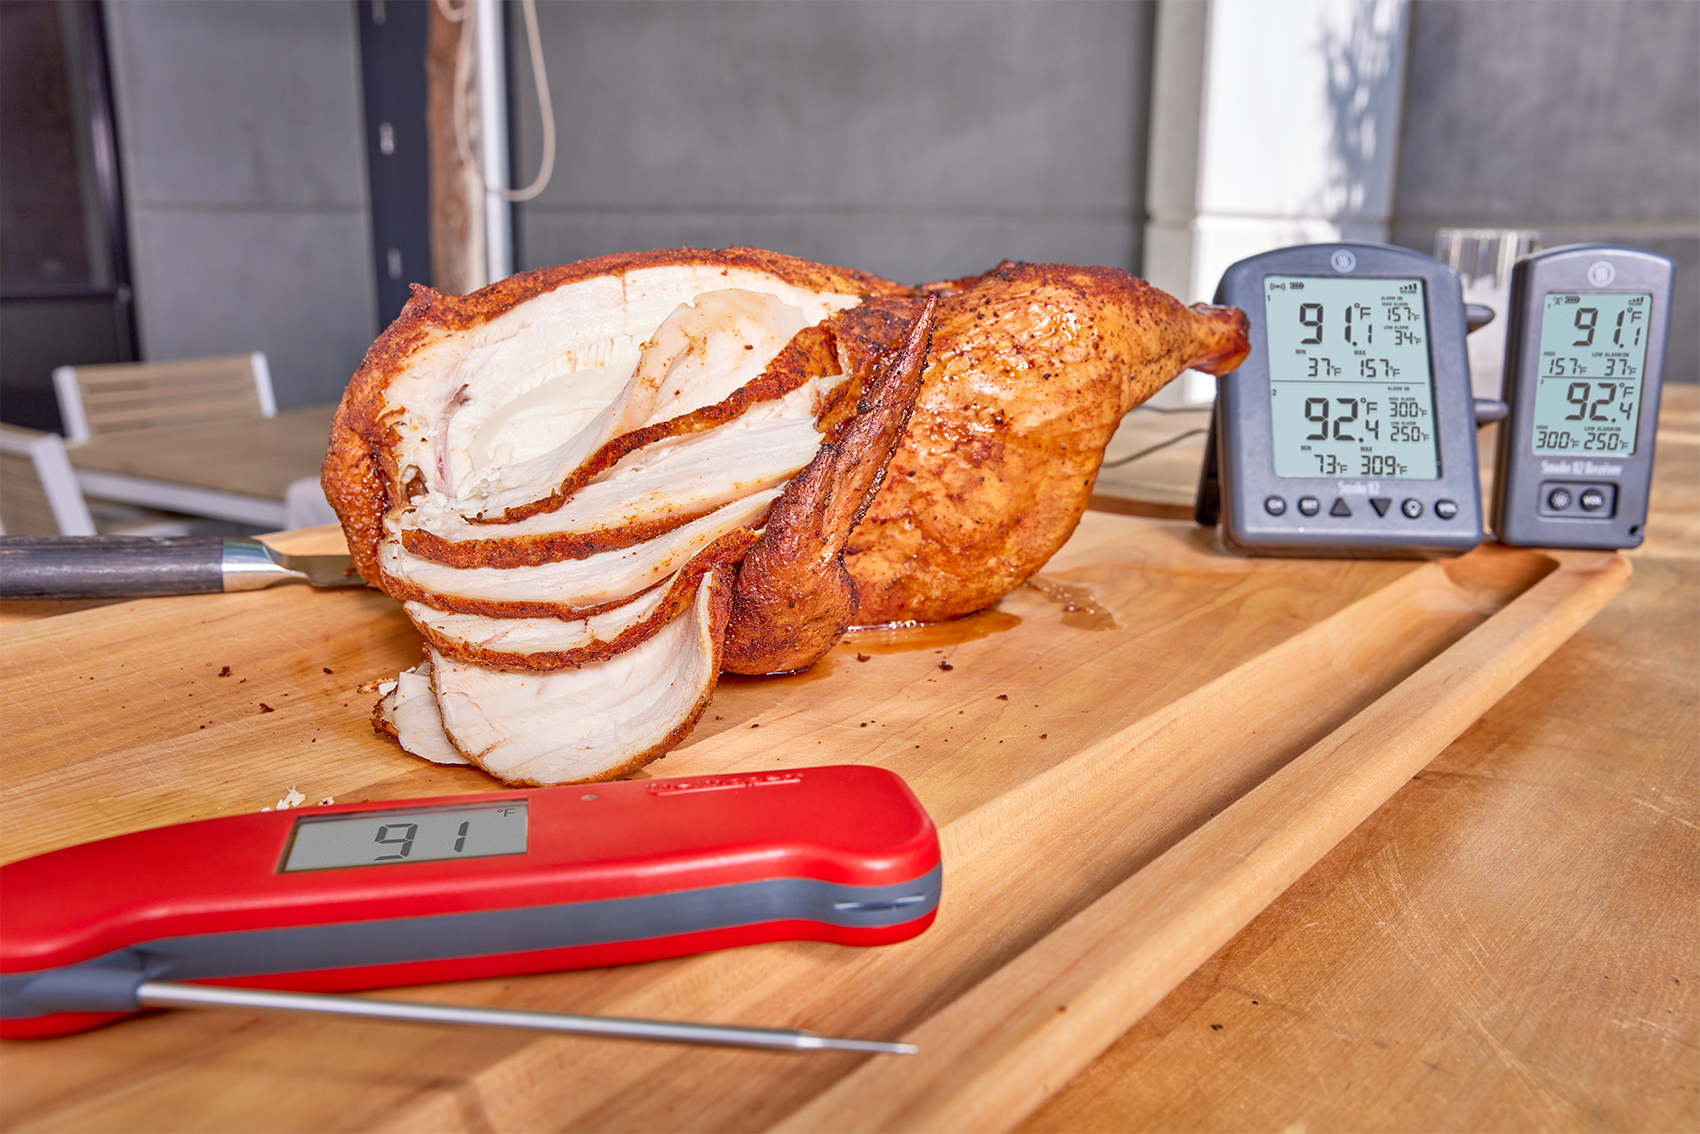 Apple Wood Smoked Chicken Recipe and ThermoPro Thermometer Review